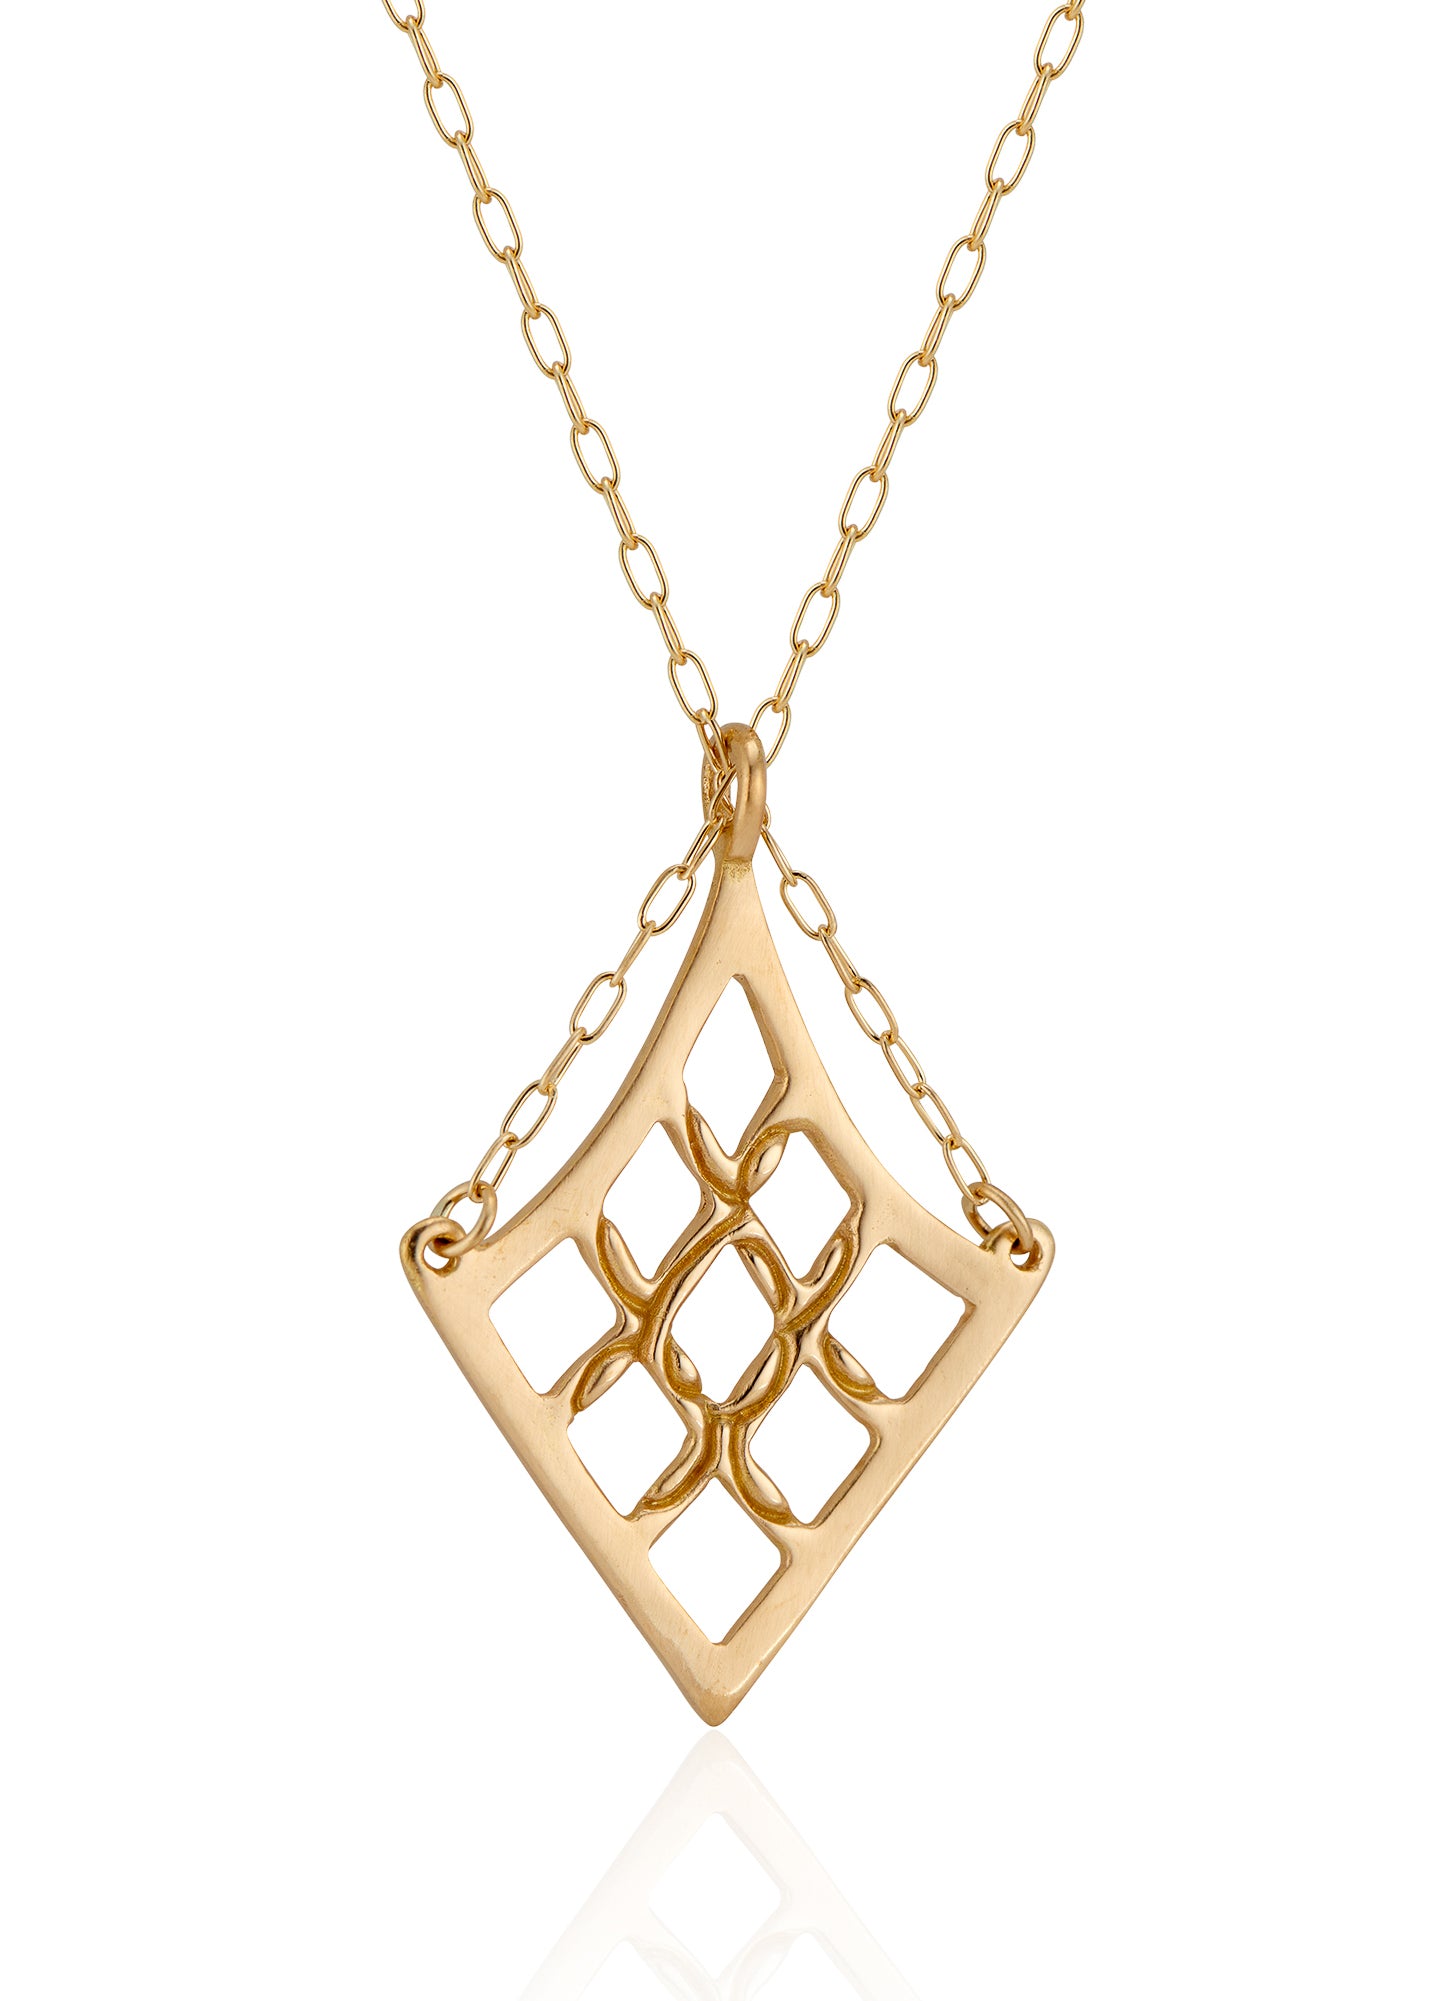 As formidable as the princess for which it is named. With its detailed gold lattice work, the Petite Shera necklace is a smaller version of the Shera necklace. A balance of delicate, bold and eye-catching, this is an empowering piece that makes a statement.